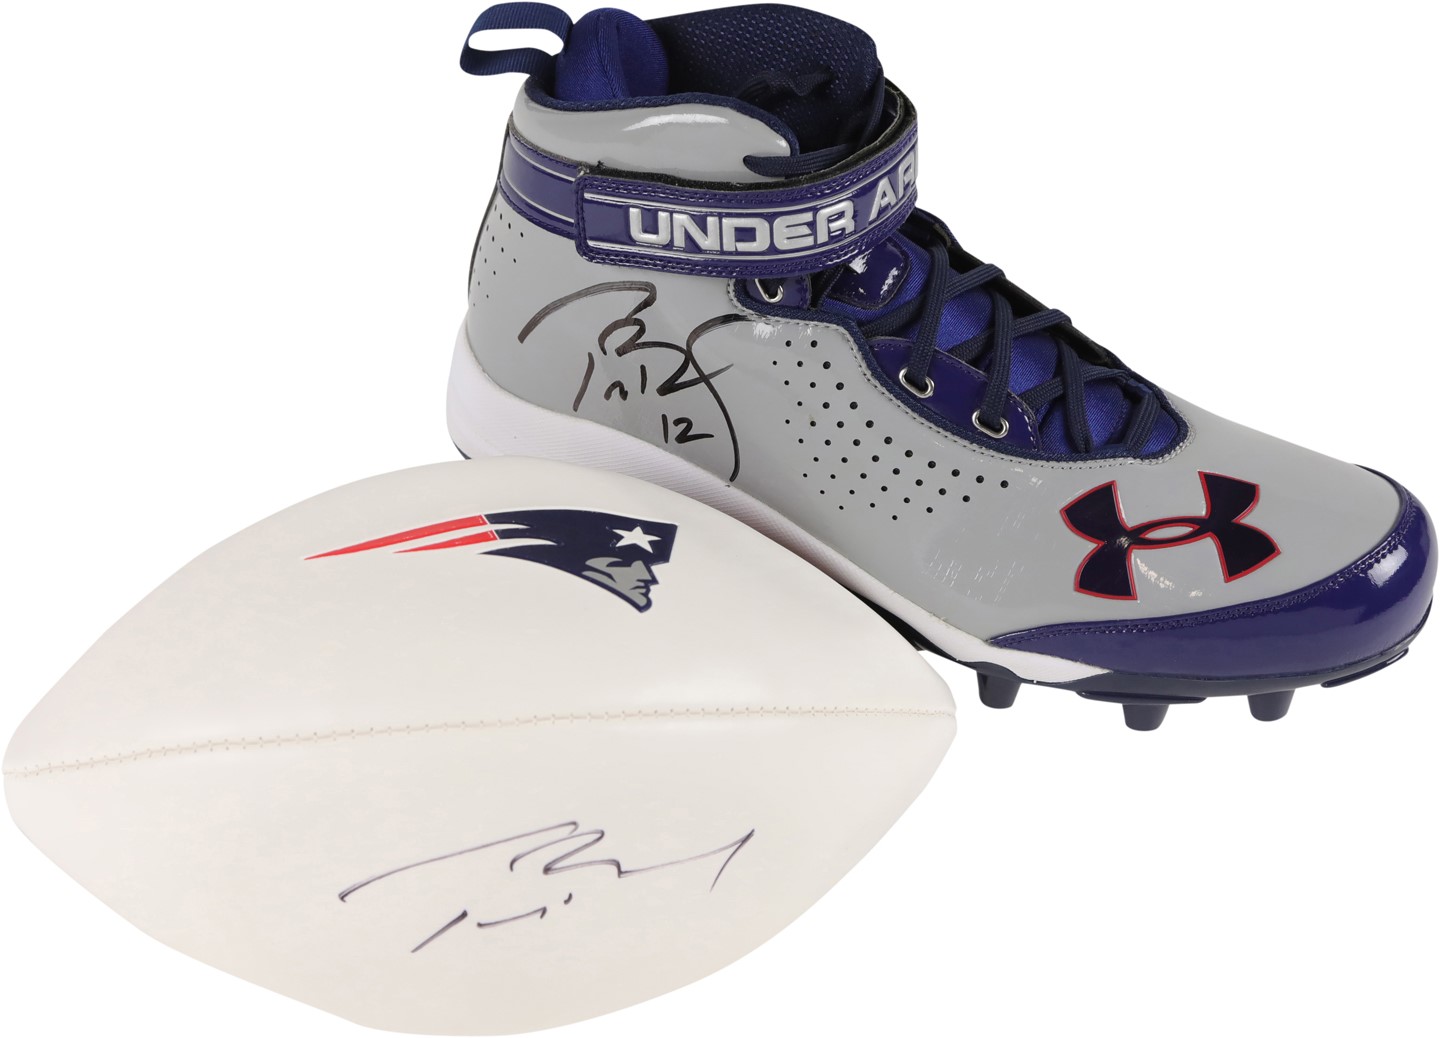 Tom Brady Signed Football and Under Armour Cleat (PSA)